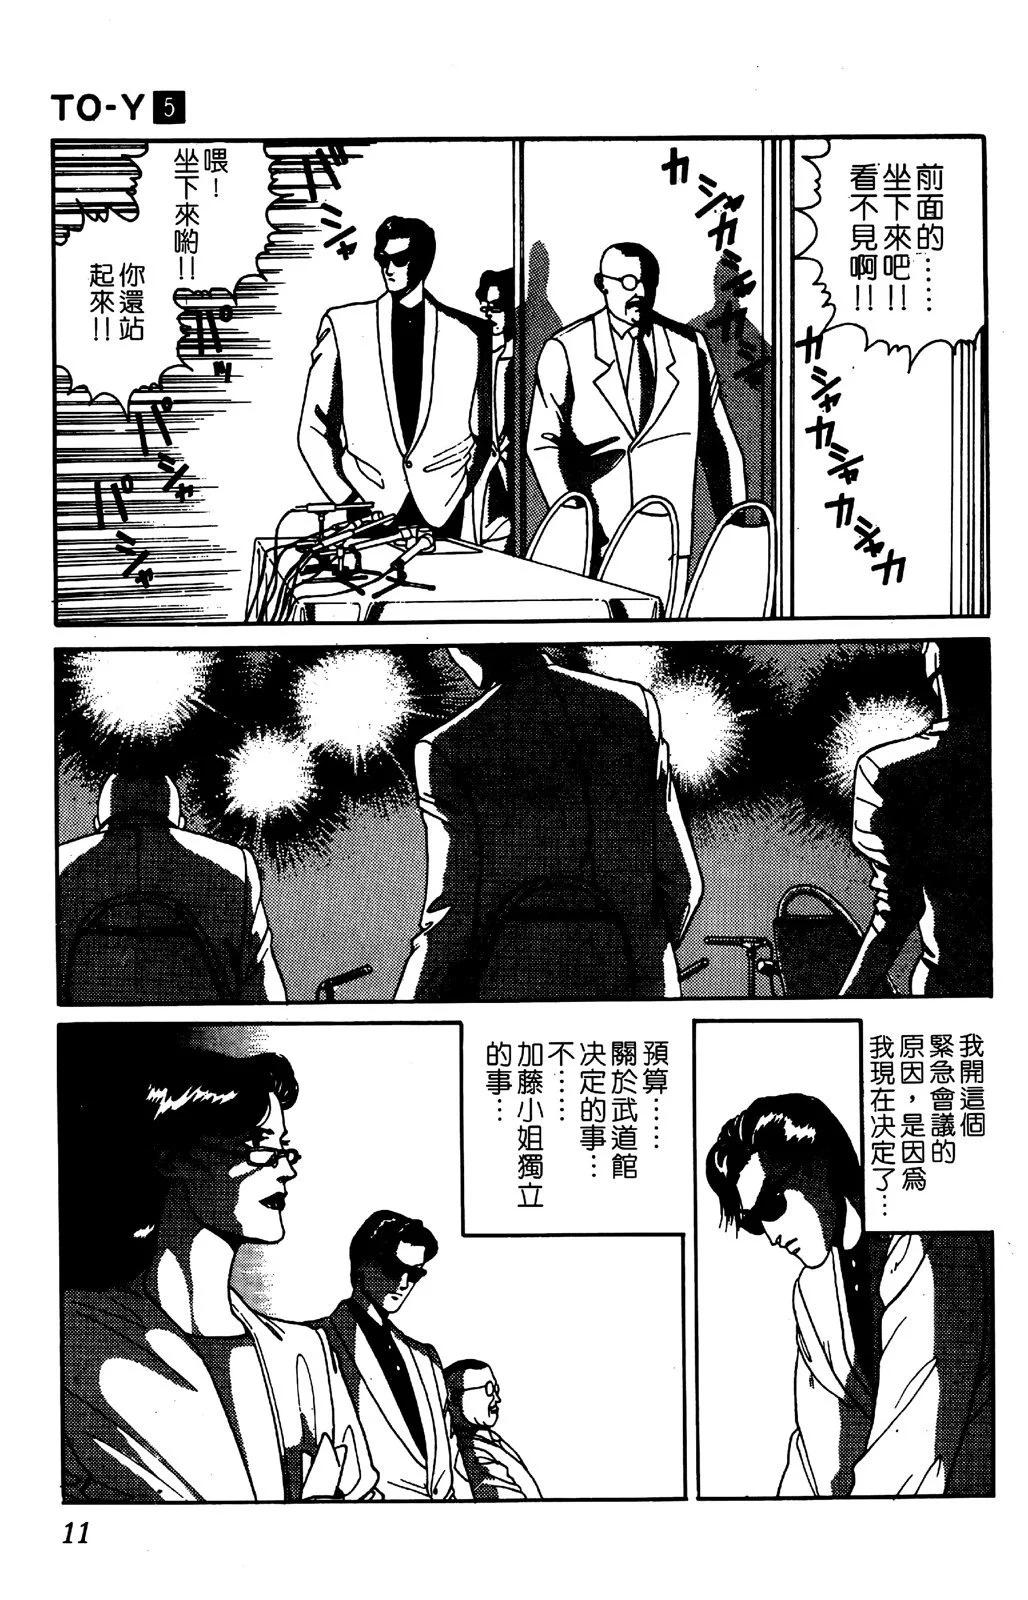 TO-Y - 第05卷(1/4) - 6